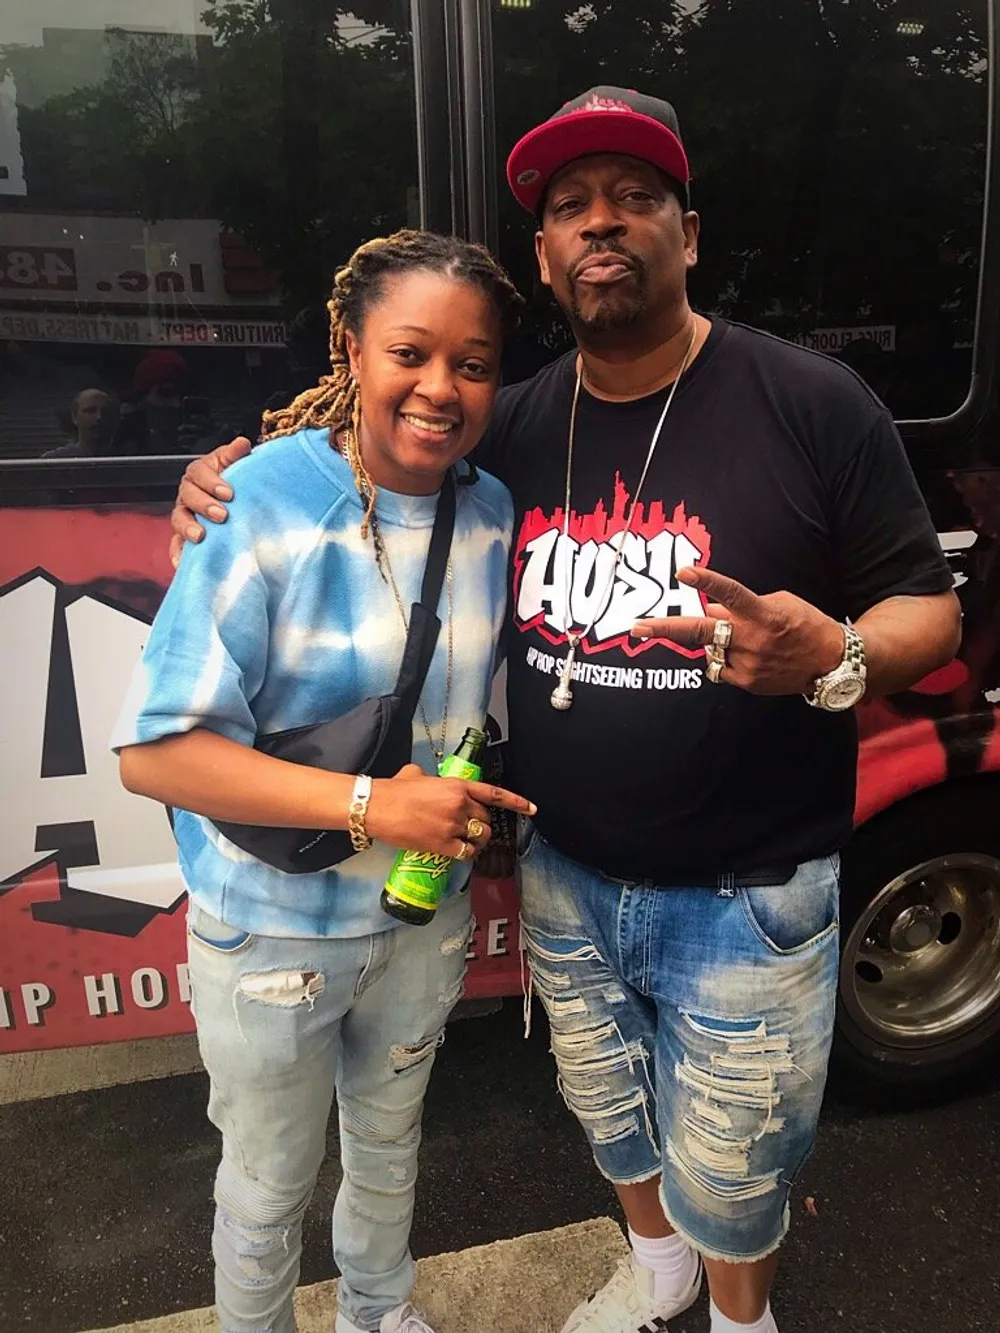 Two individuals are posing for a photo together on the street with a hip hop sightseeing tour bus in the background and one of them holding a drink